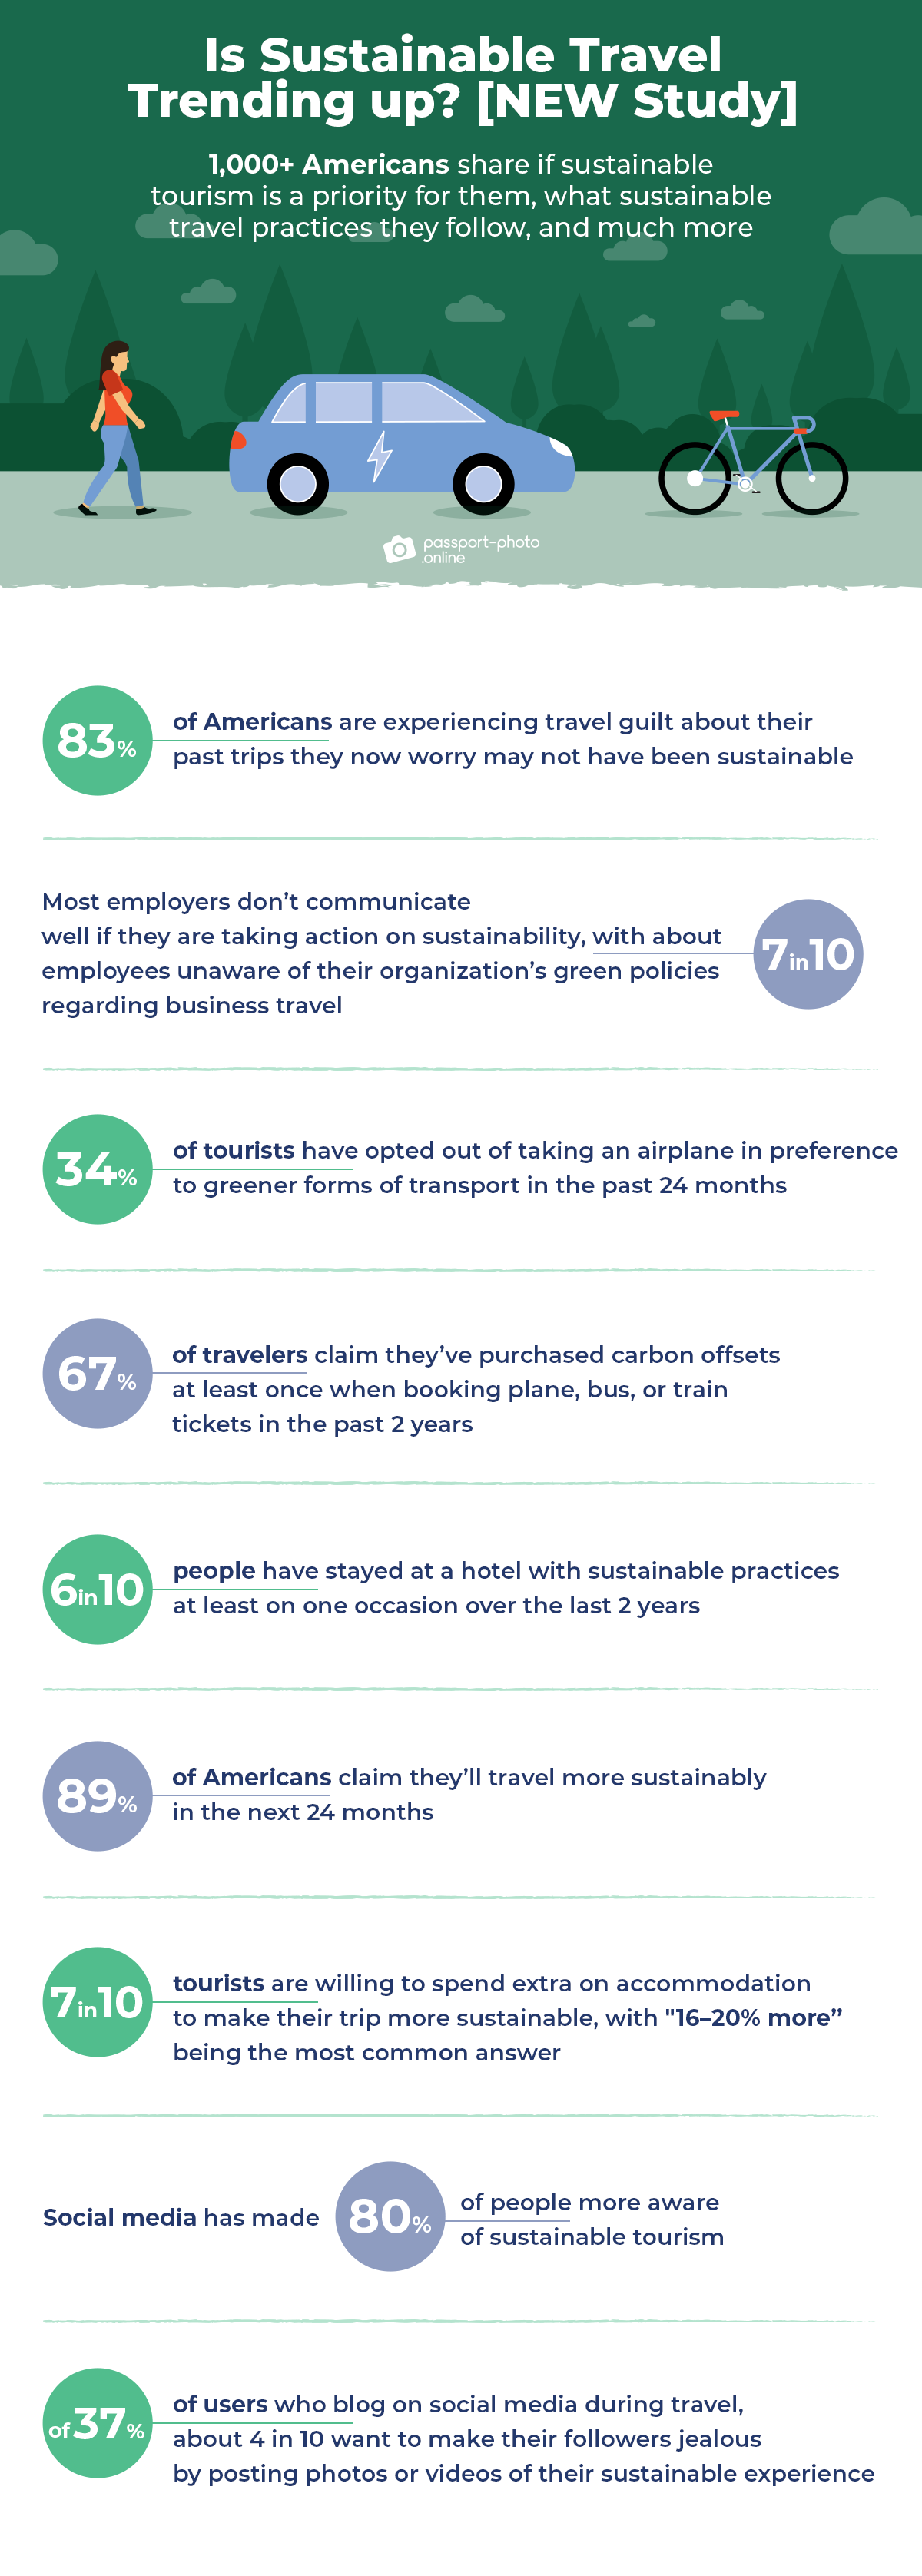 sustainable travel: study’s key findings